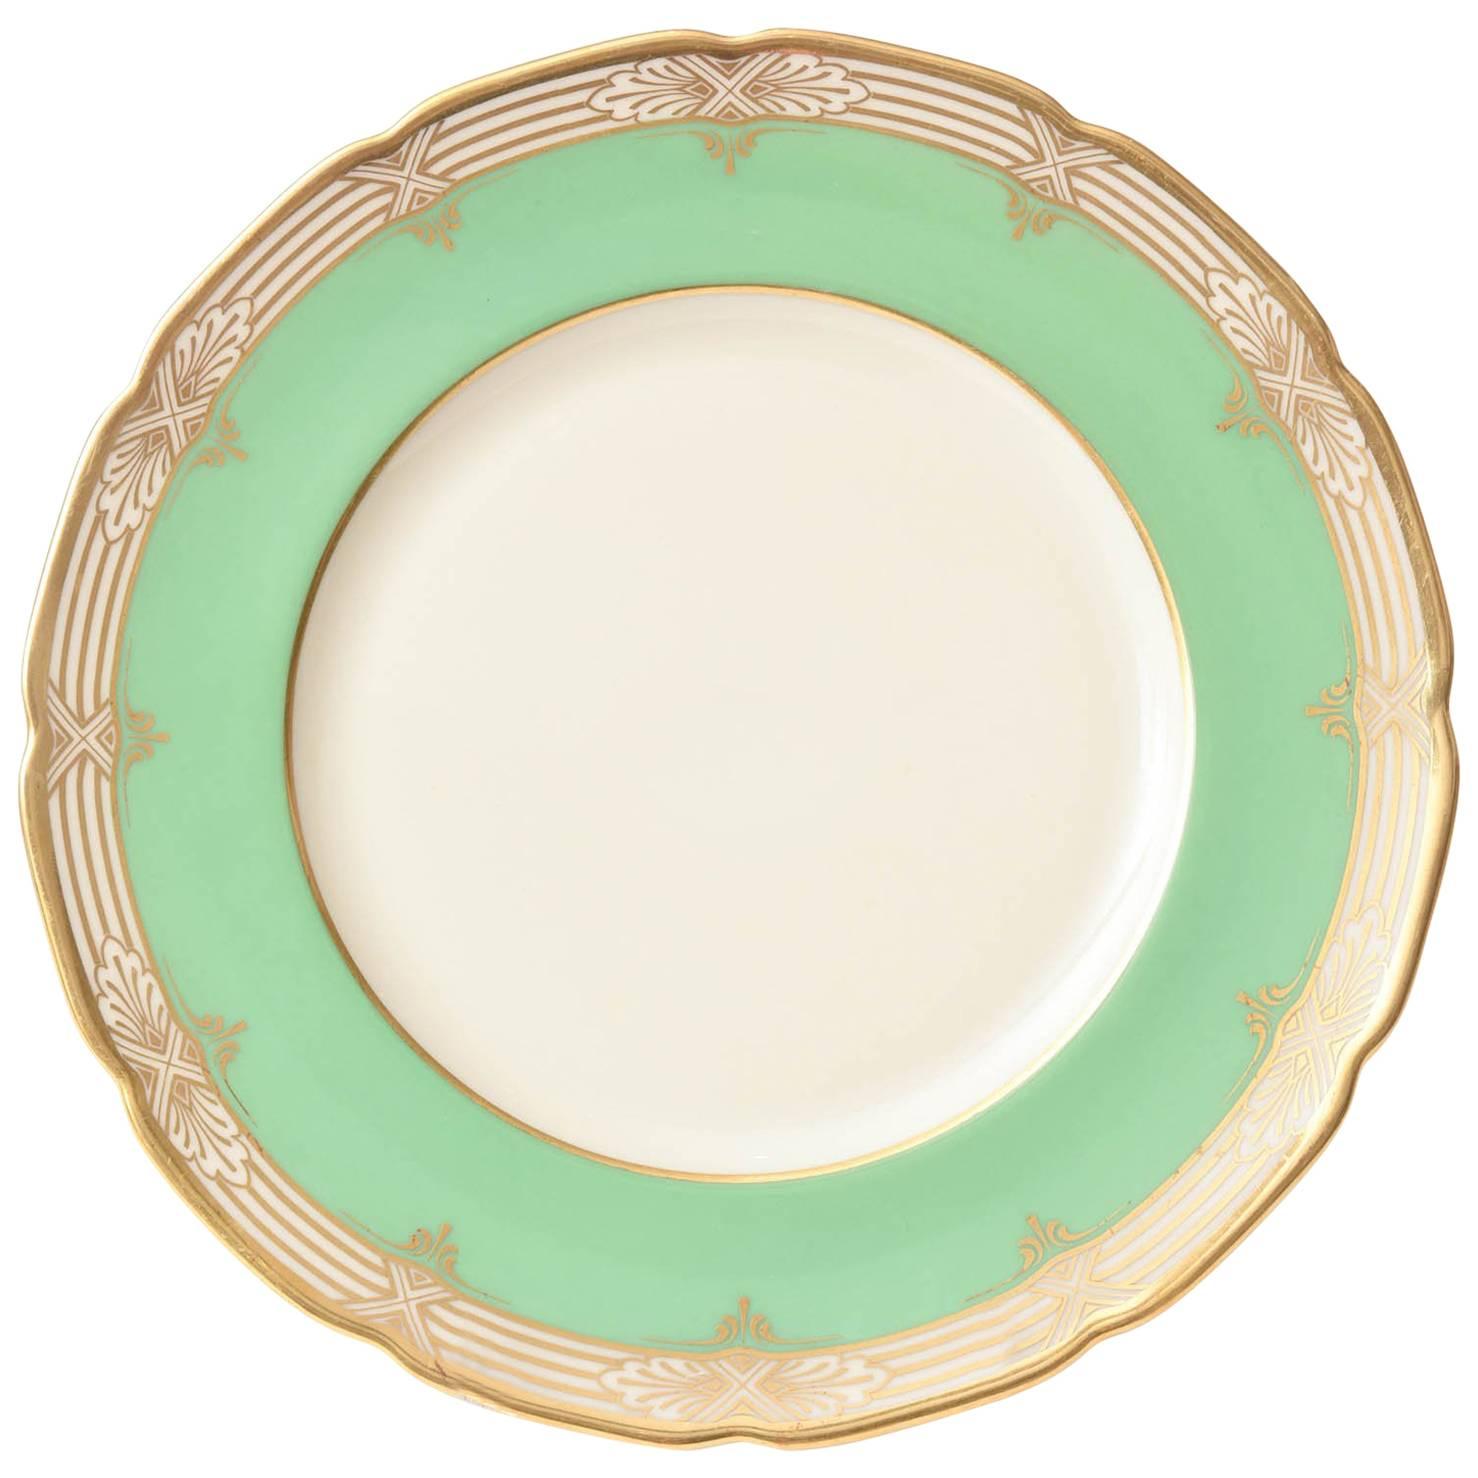 12 Pretty Green and Gold Dinner Plates Antique